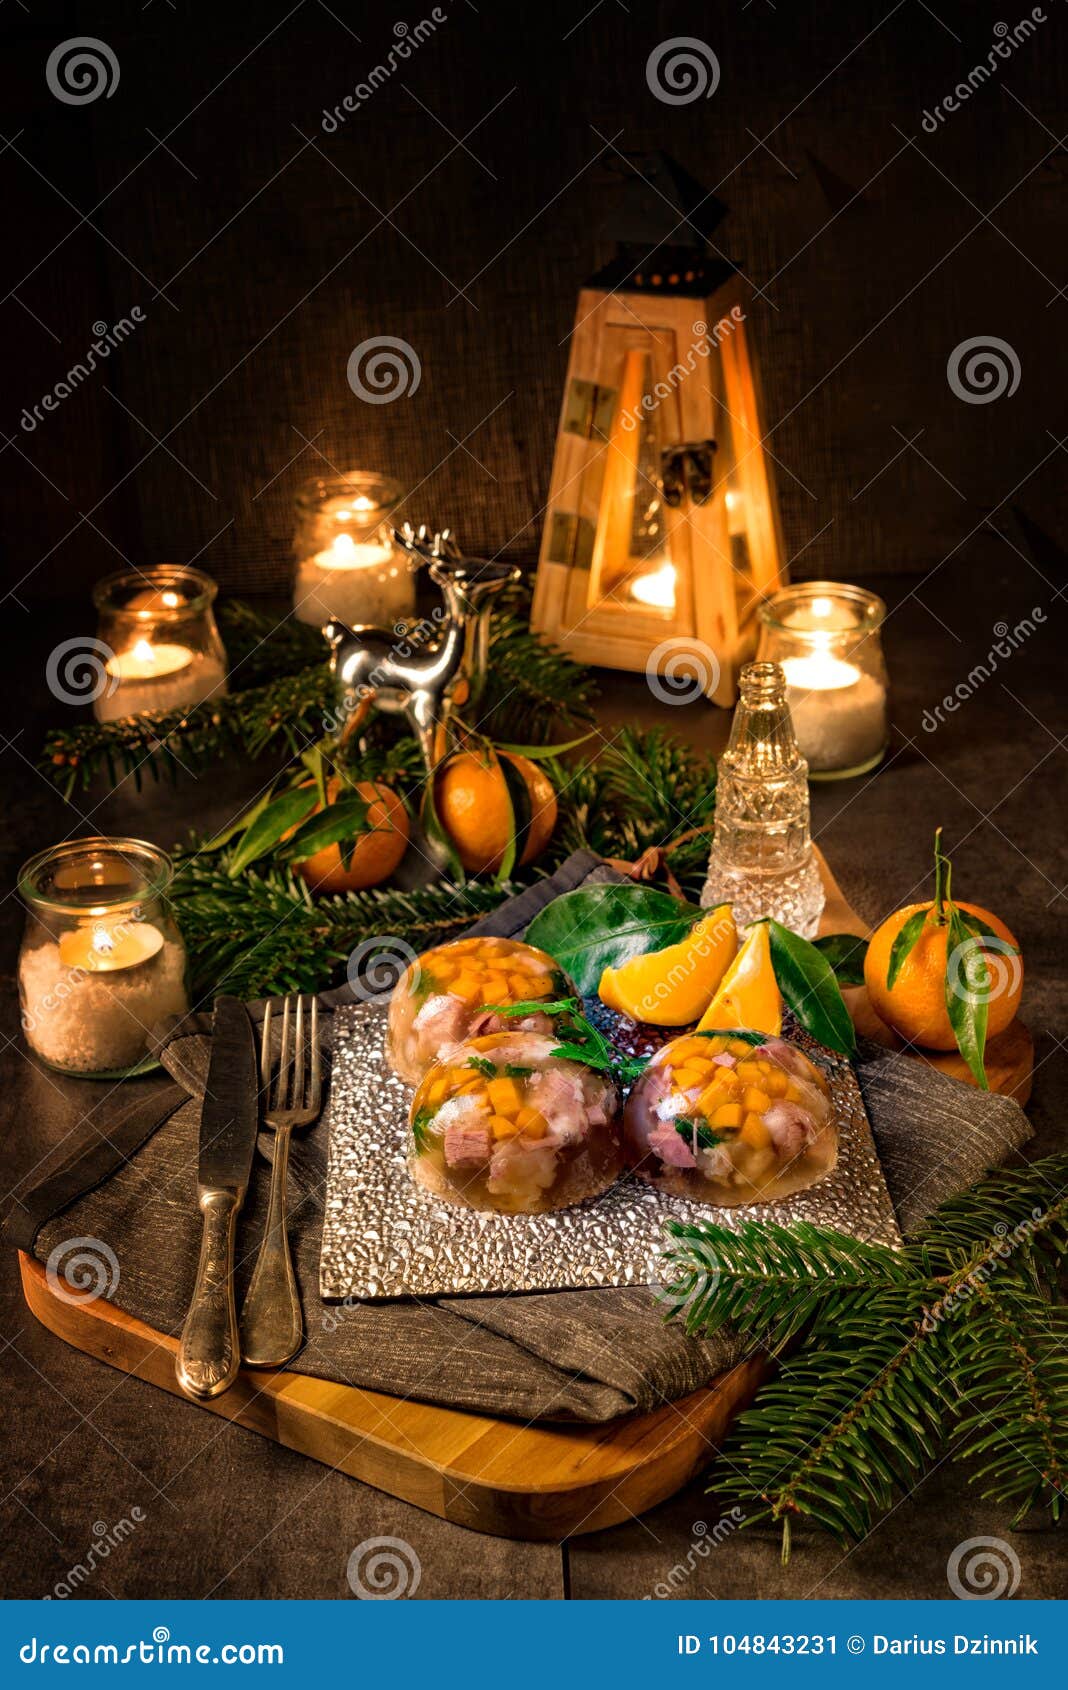 Galart - Polish Winter Meat Jelly Stock Image - Image of specialization ...